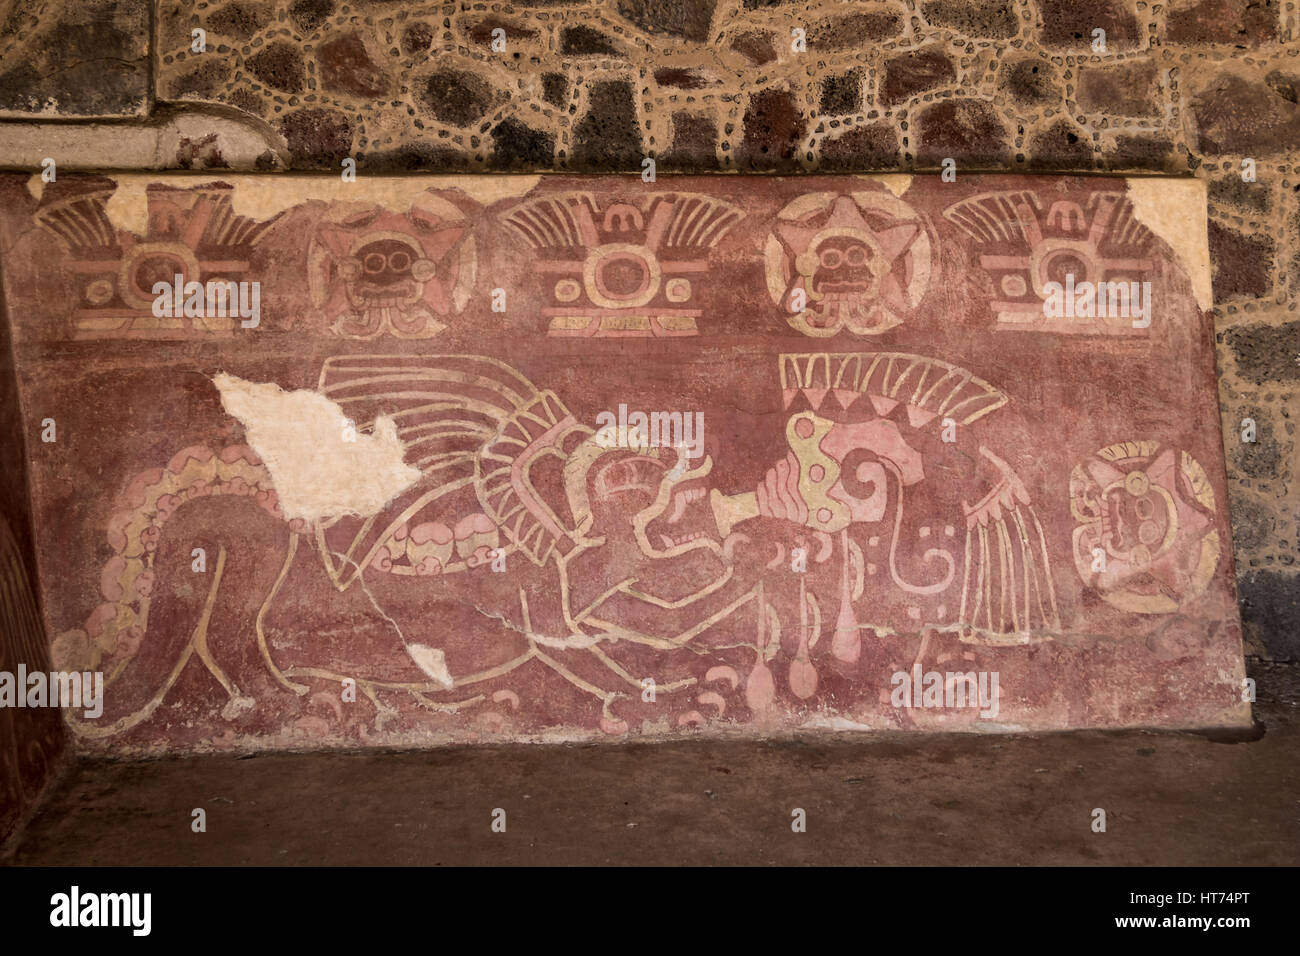 The Red Jaguar mural painting at Teotihuacan Ruins - Mexico City, Mexico Stock Photo